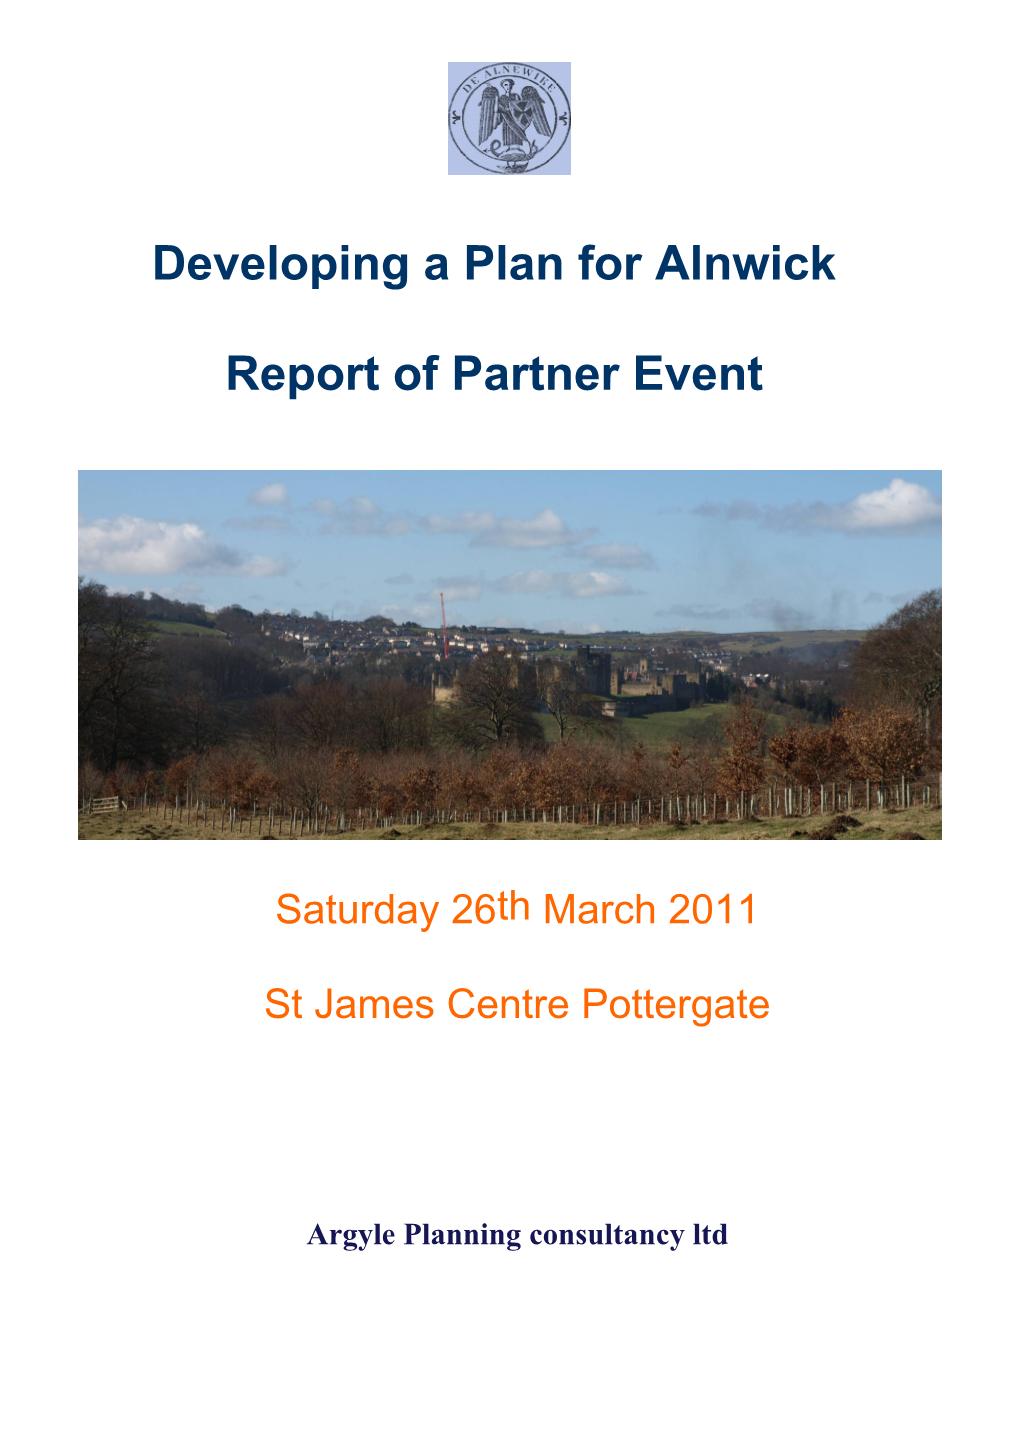 Developing a Plan for Alnwick